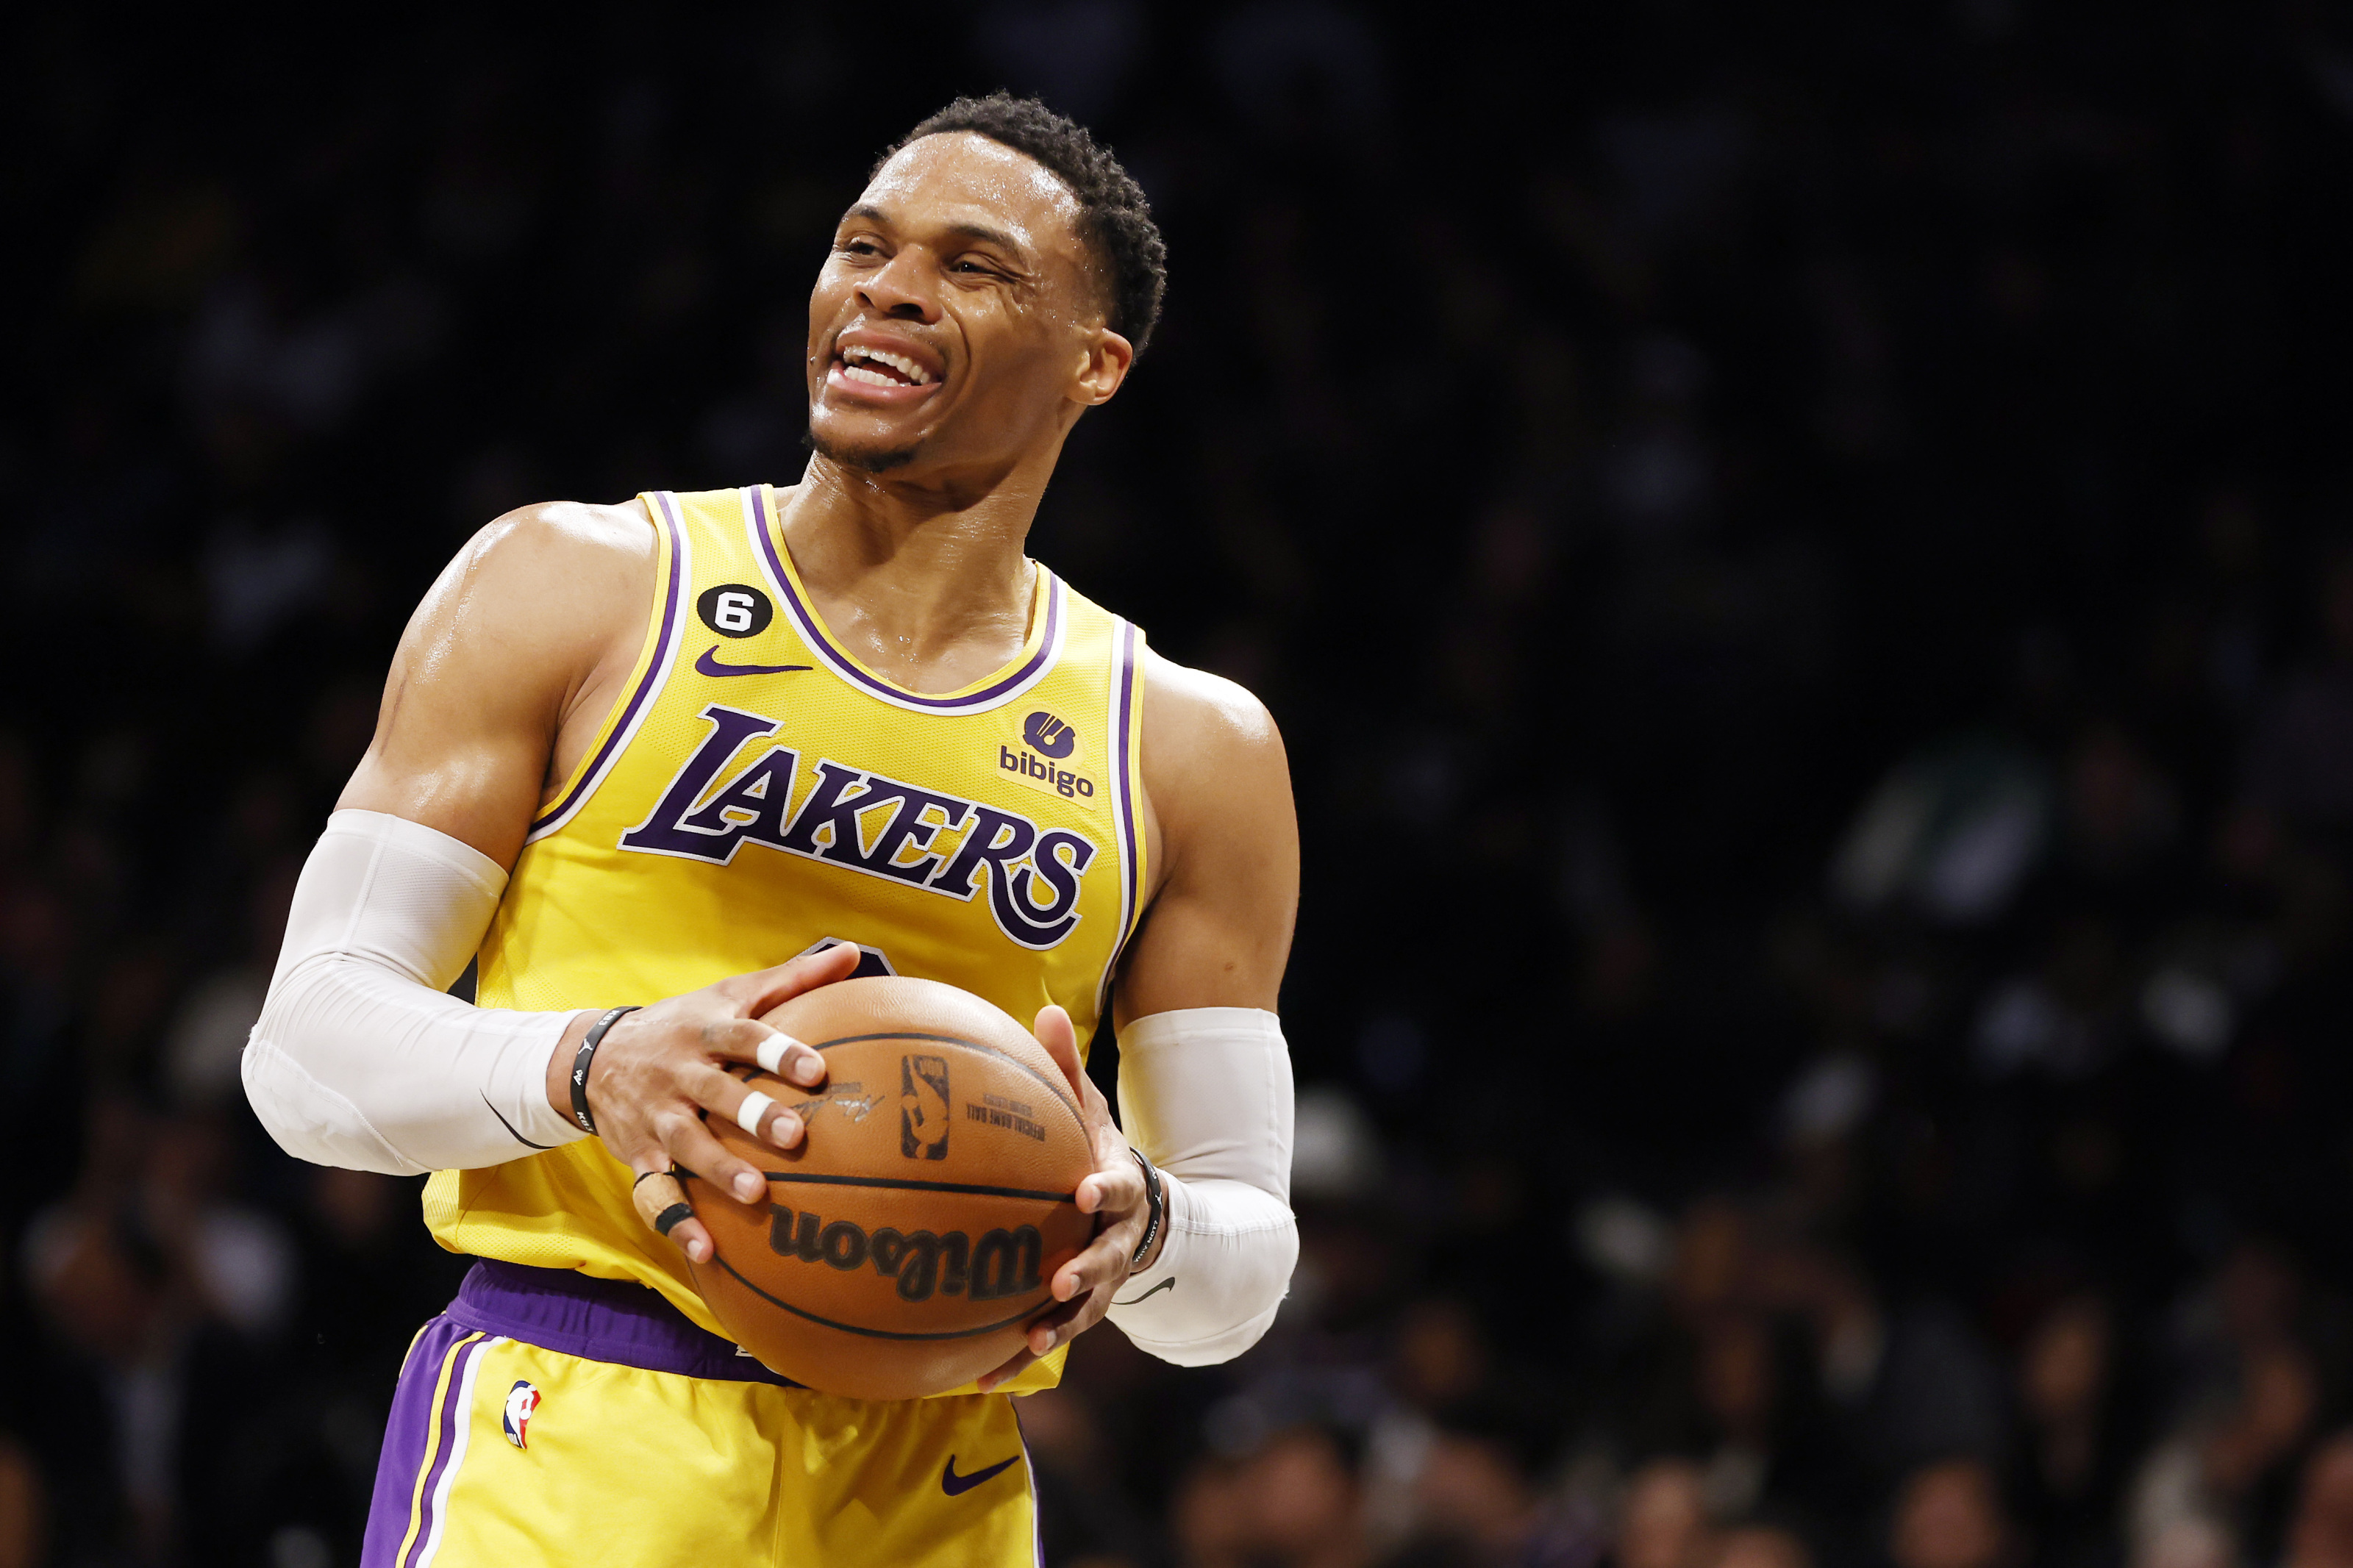 NBA Rumors: Russell Westbrook May Not Re-Sign With Clippers